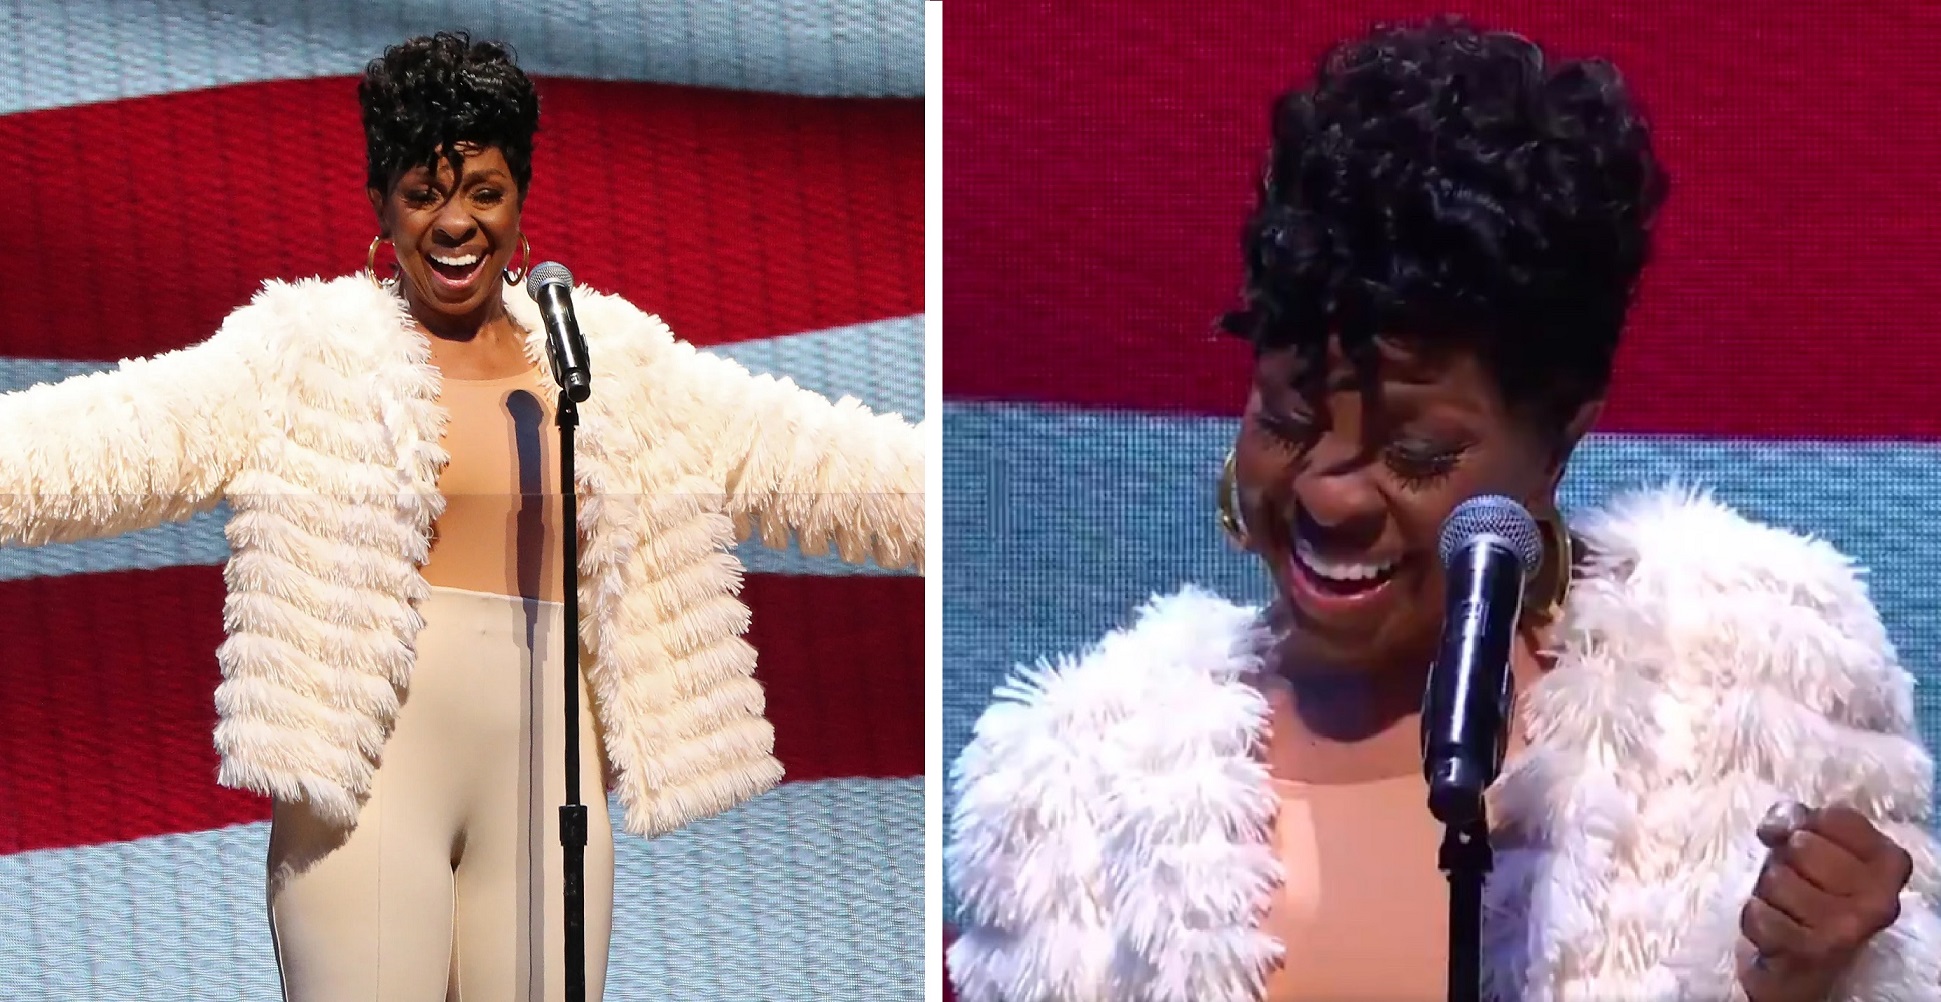 Watch: Gladys Knight Belts Out ‘Star Spangled Banner’ And Absolutely Nails It at 76